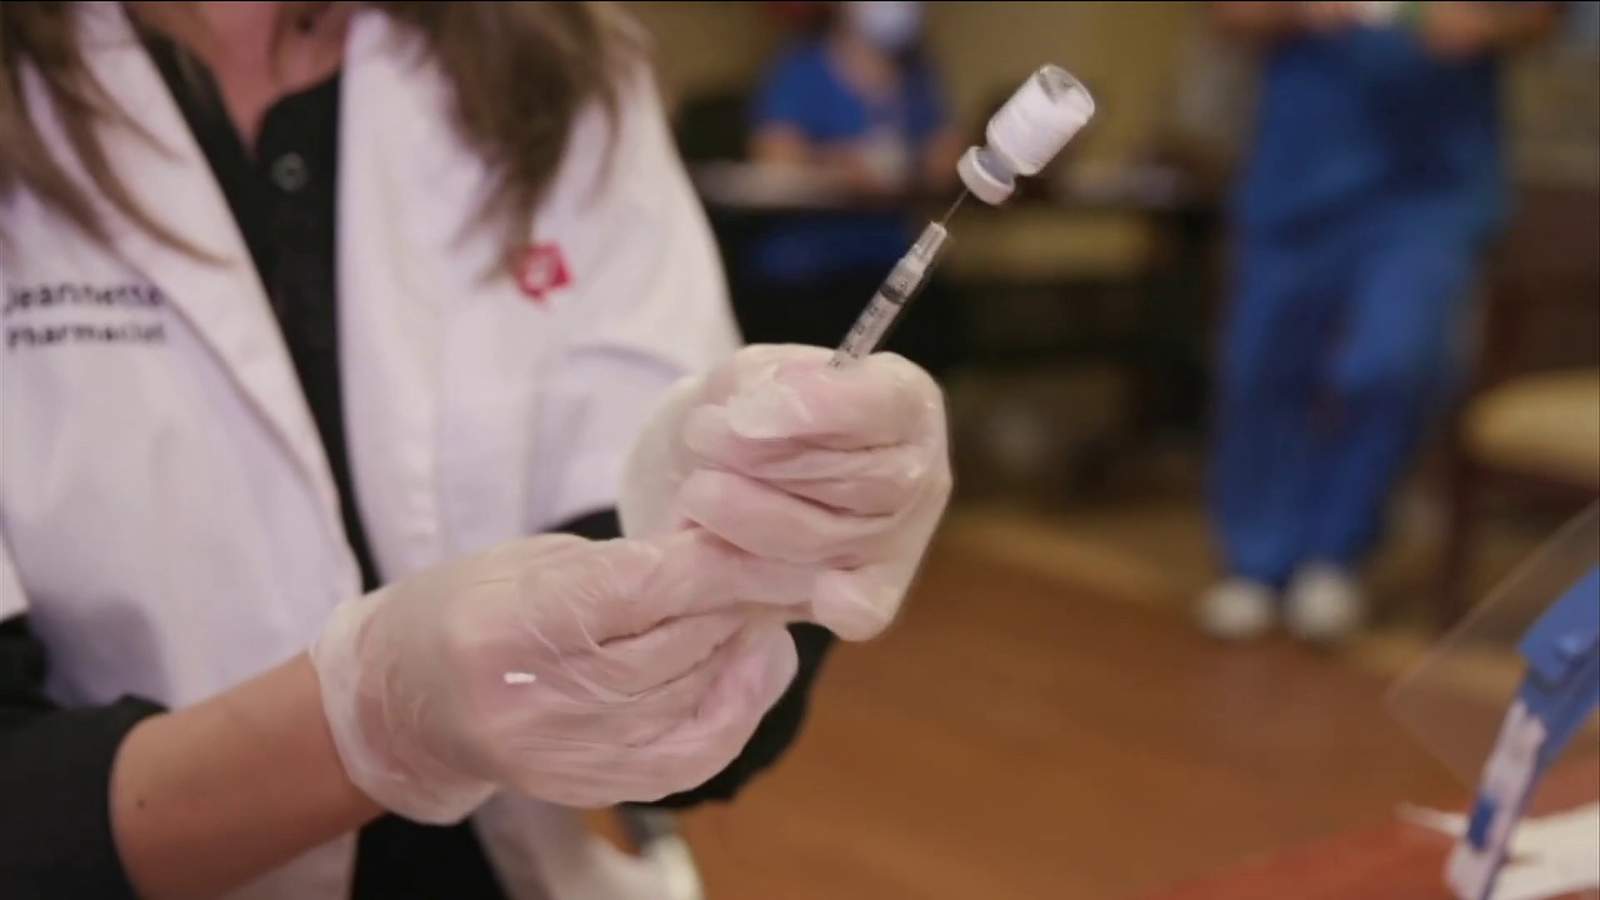 UF Health Jacksonville among hospitals offering COVID-19 vaccines to some patients